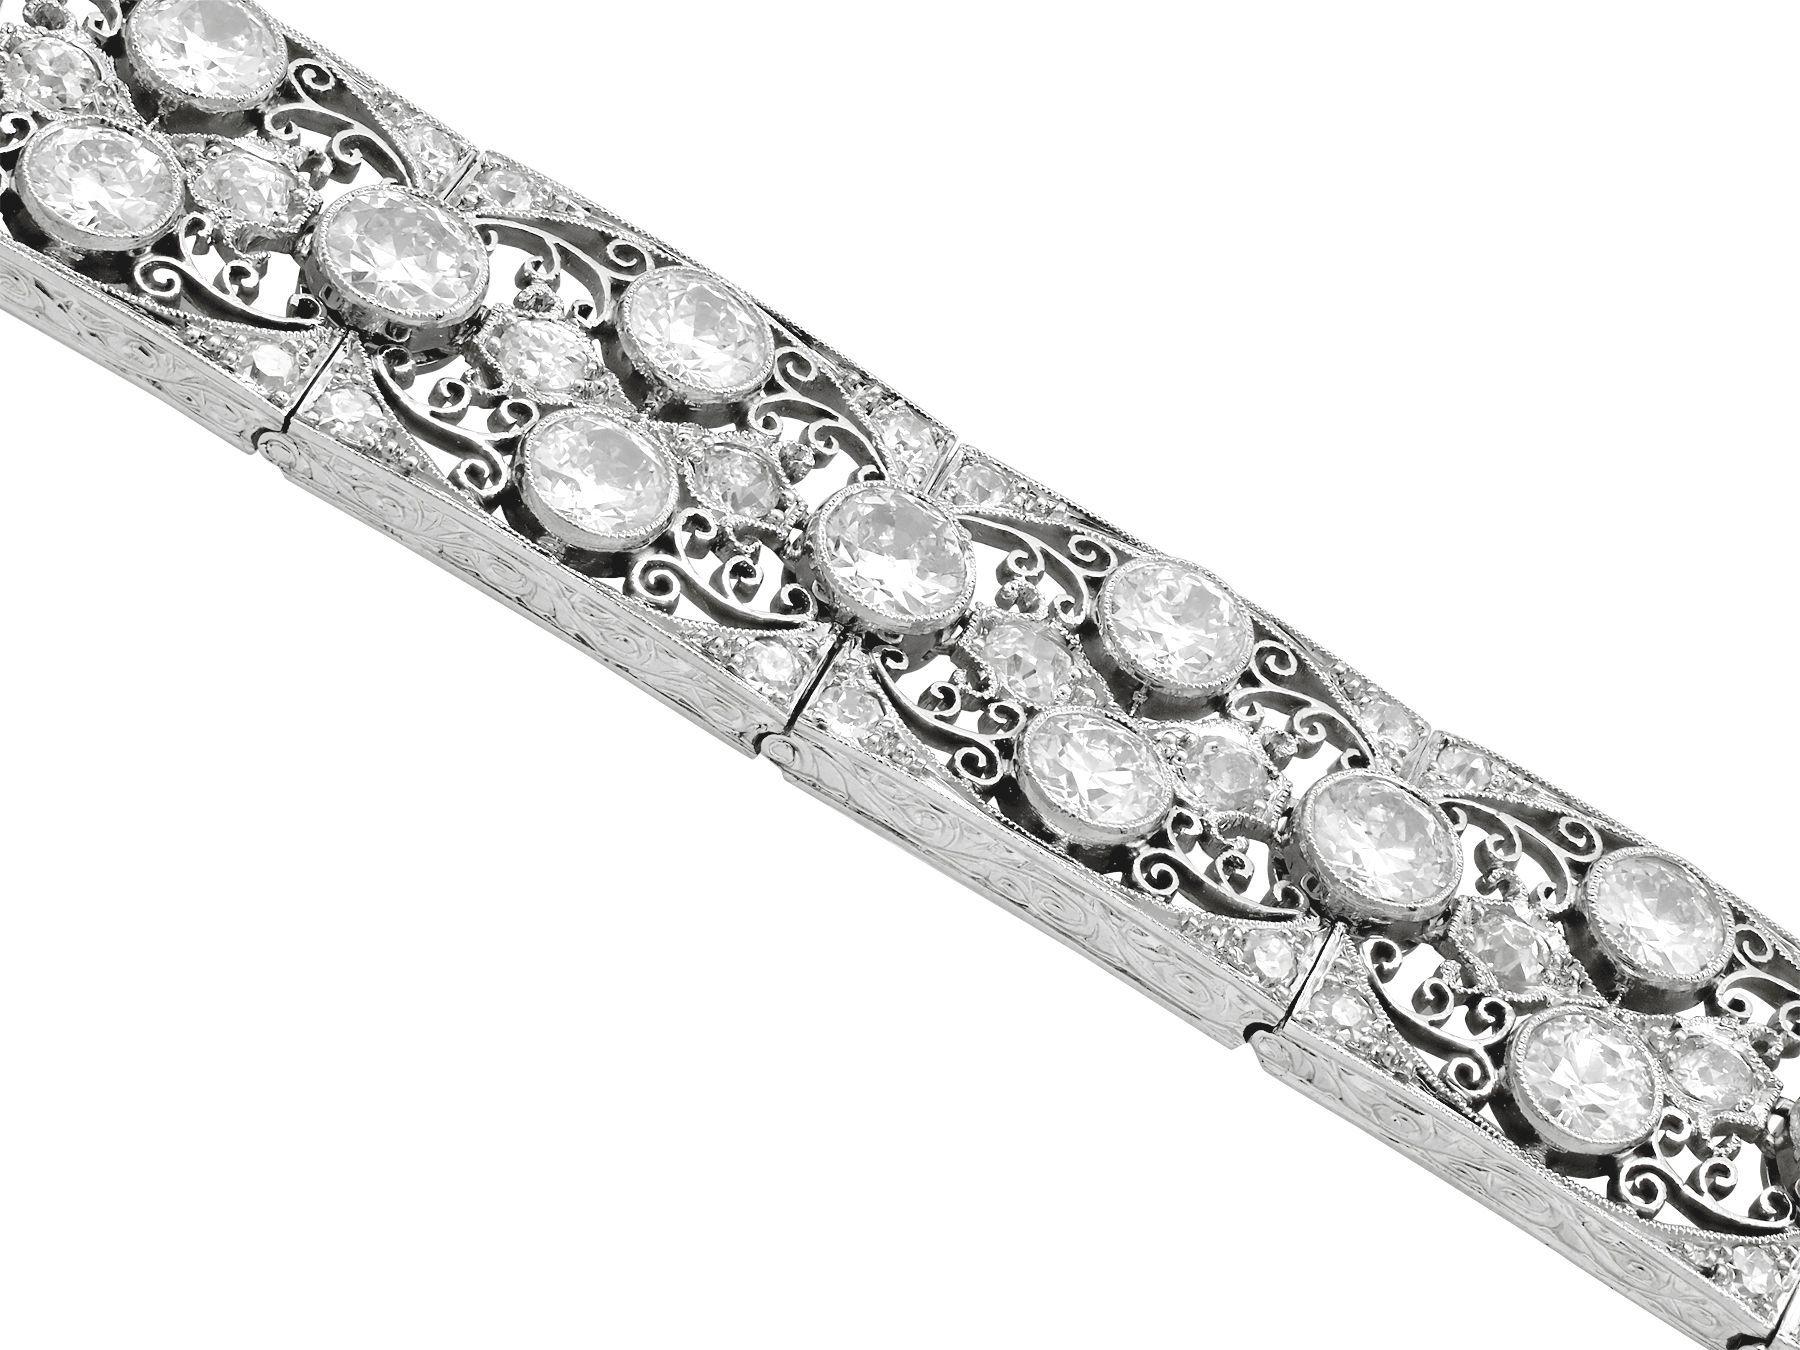 Antique 1920s French Import 15.80 Carat Diamond and Platinum Bracelet In Excellent Condition For Sale In Jesmond, Newcastle Upon Tyne